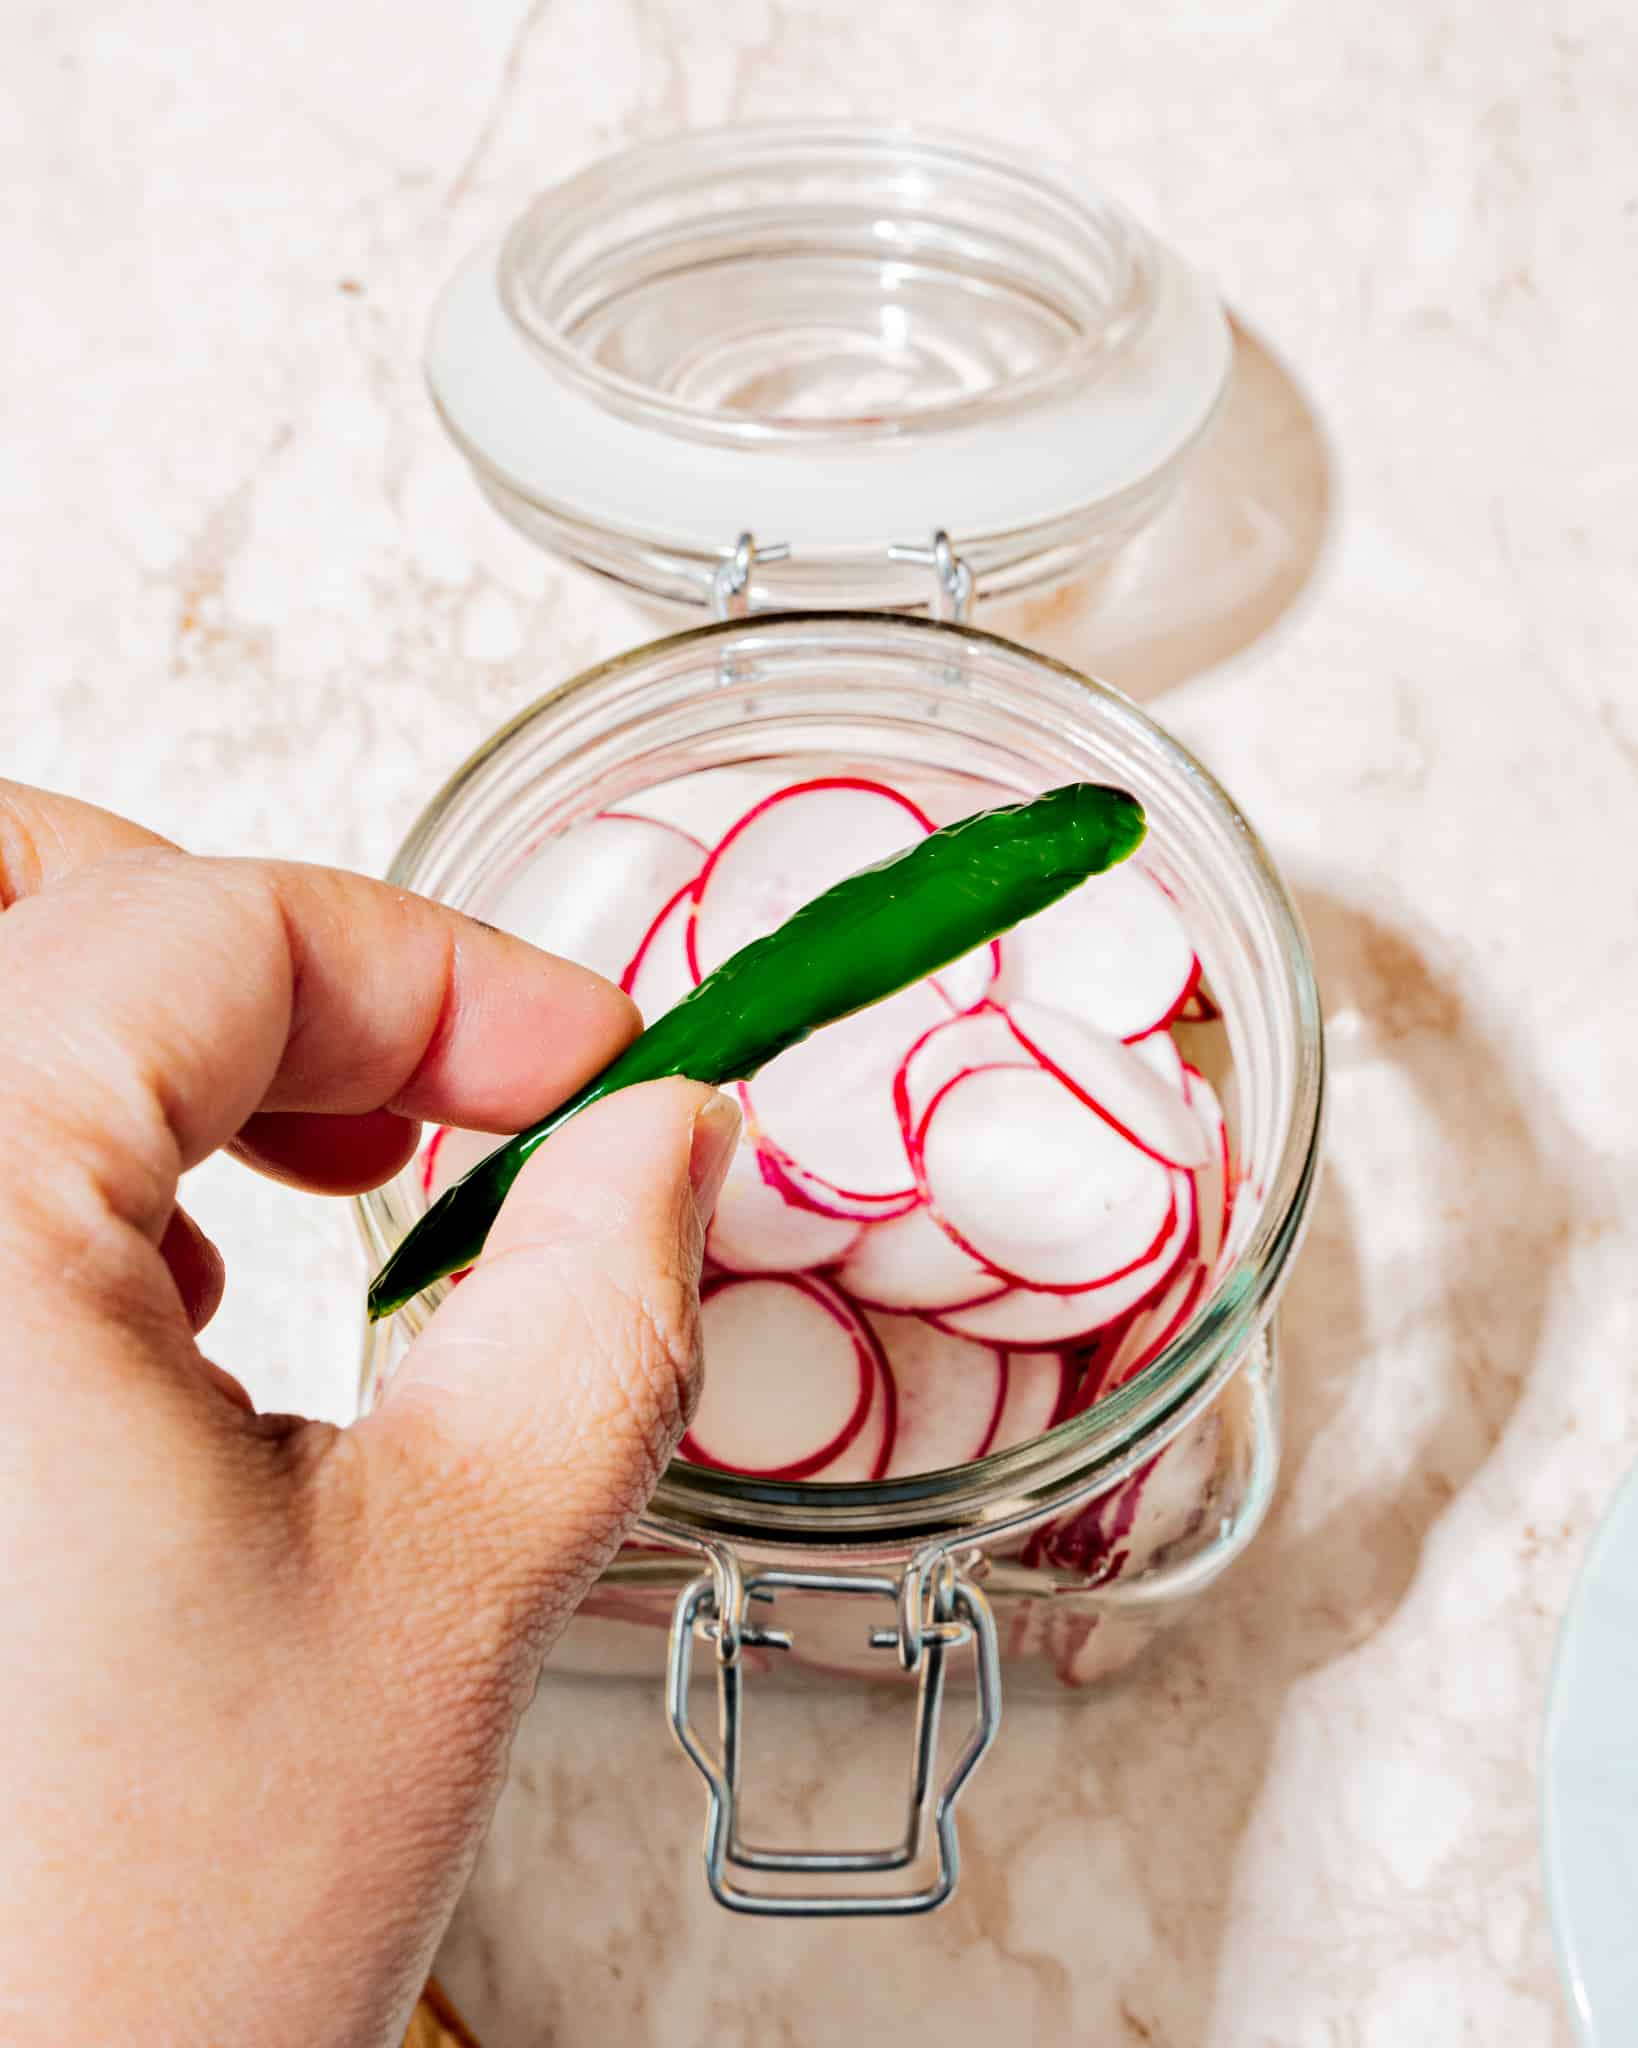 Person adding pepper to glass jar full of radishes